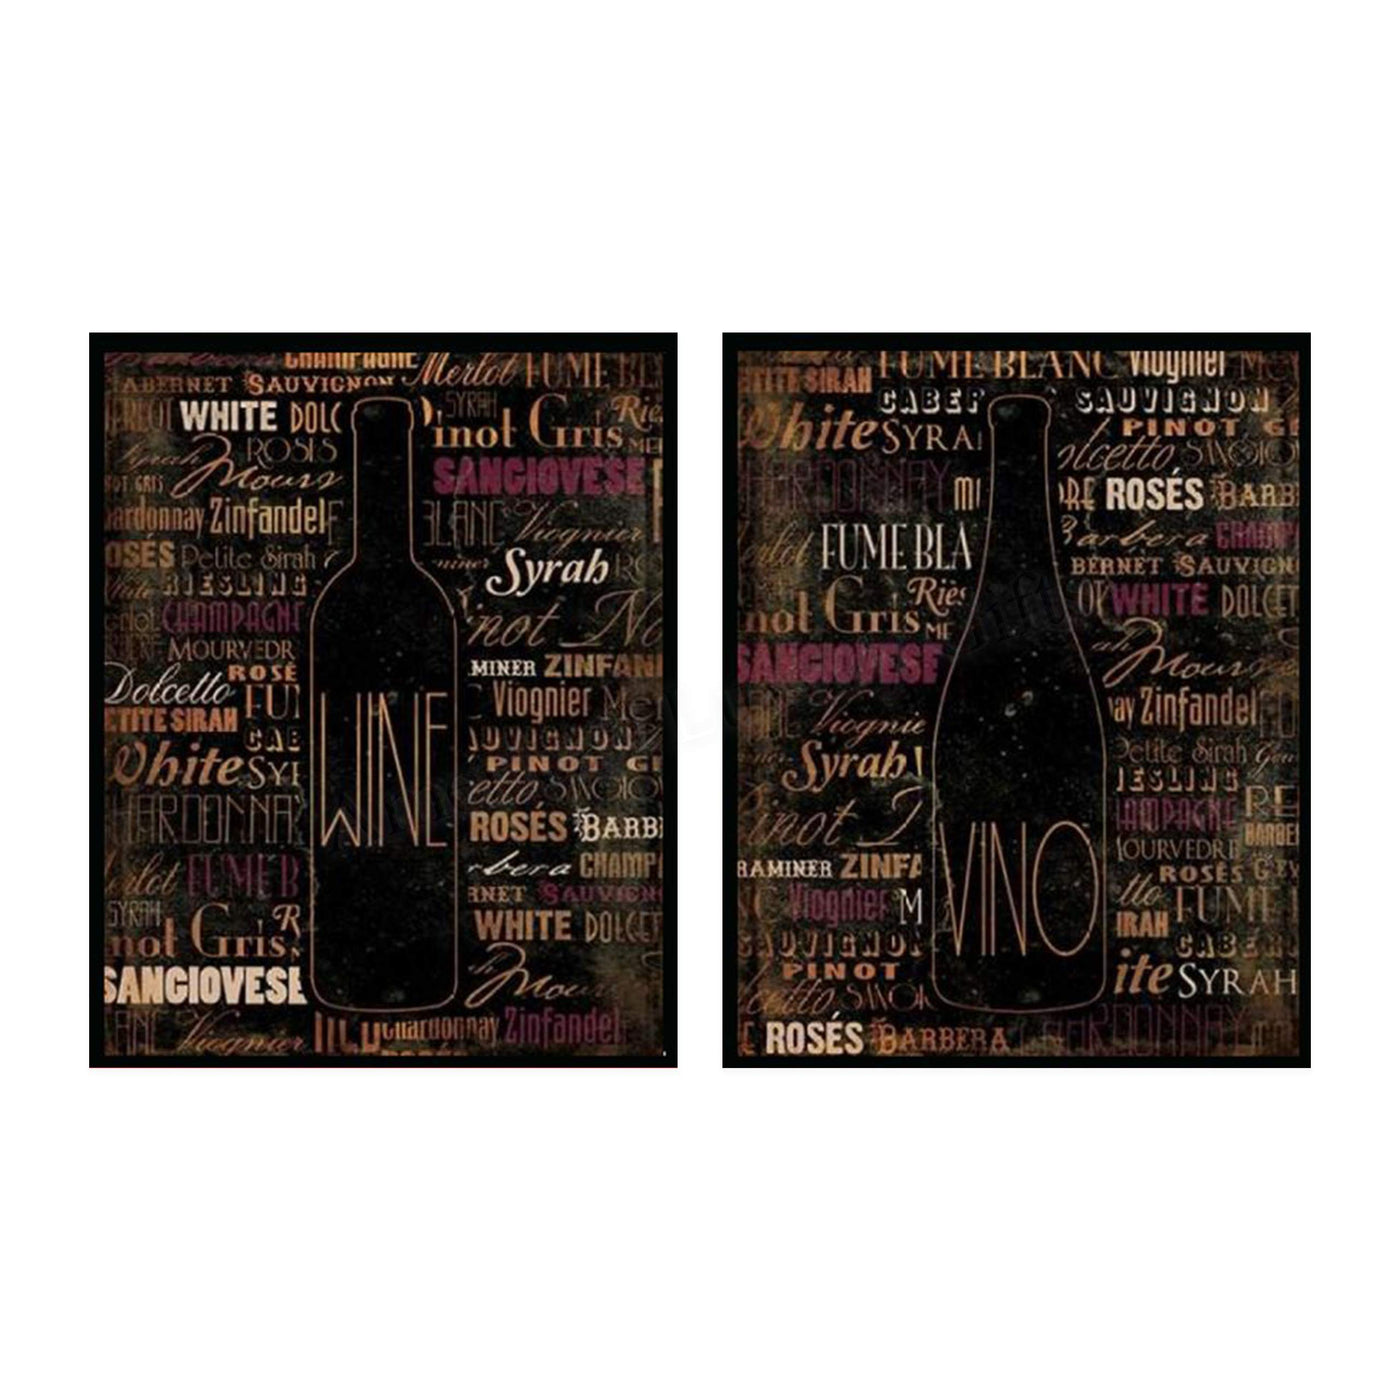 Wine & Vino Bottle Pairing with Variety Names (2)- 8 x 10"s Wall Art Prints- Ready to Frame. Home D?cor, Wine Decor & Kitchen Wall Decor. Perfect For Wine Lovers & Upscale Bars. Show Your Taste!